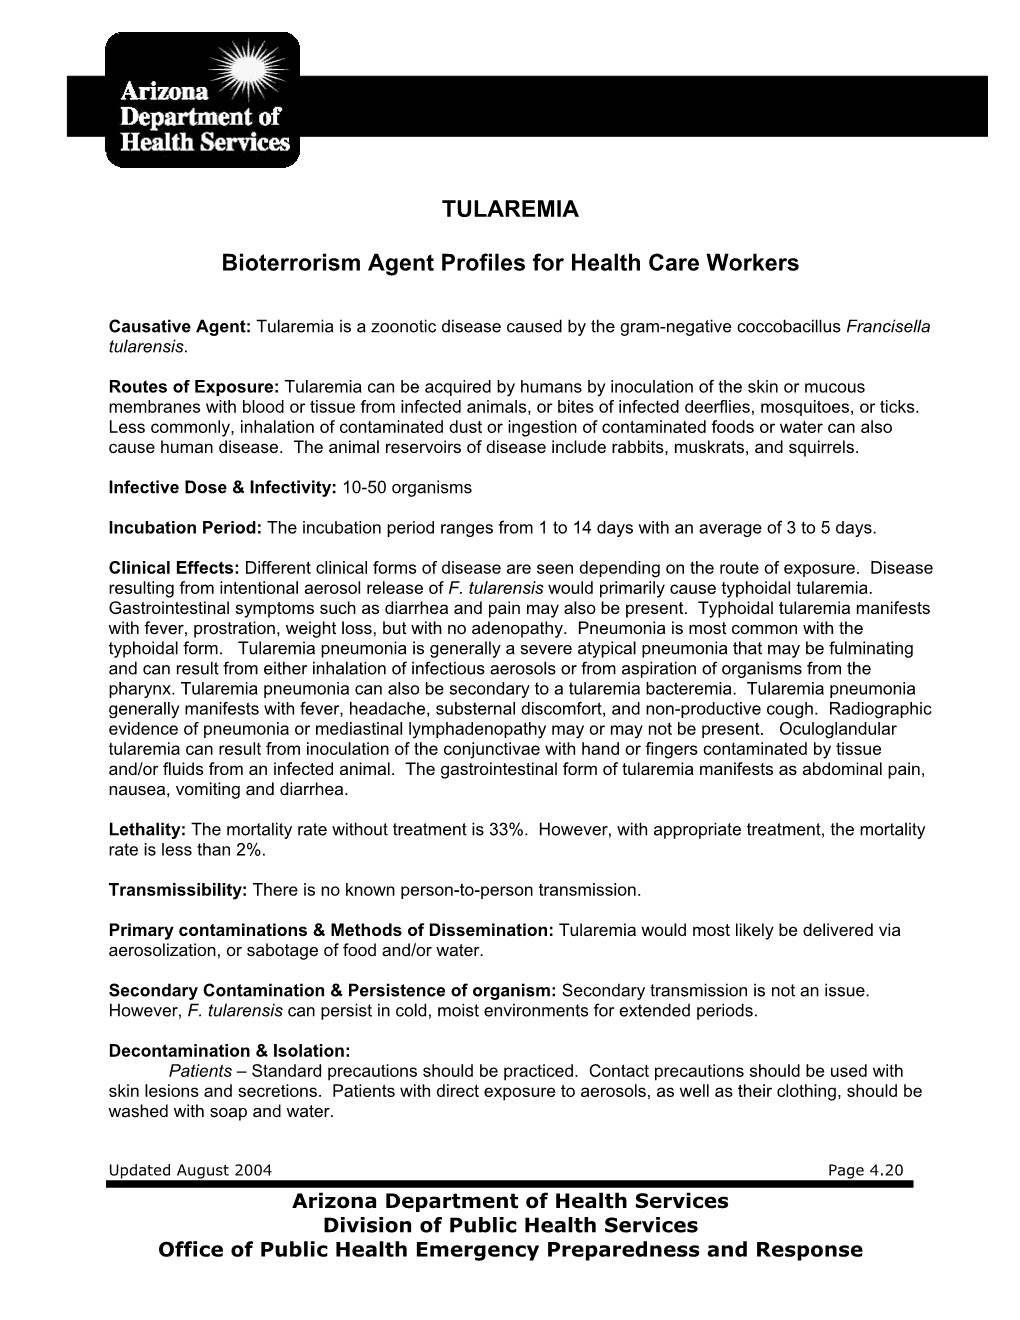 TULAREMIA Bioterrorism Agent Profiles for Health Care Workers